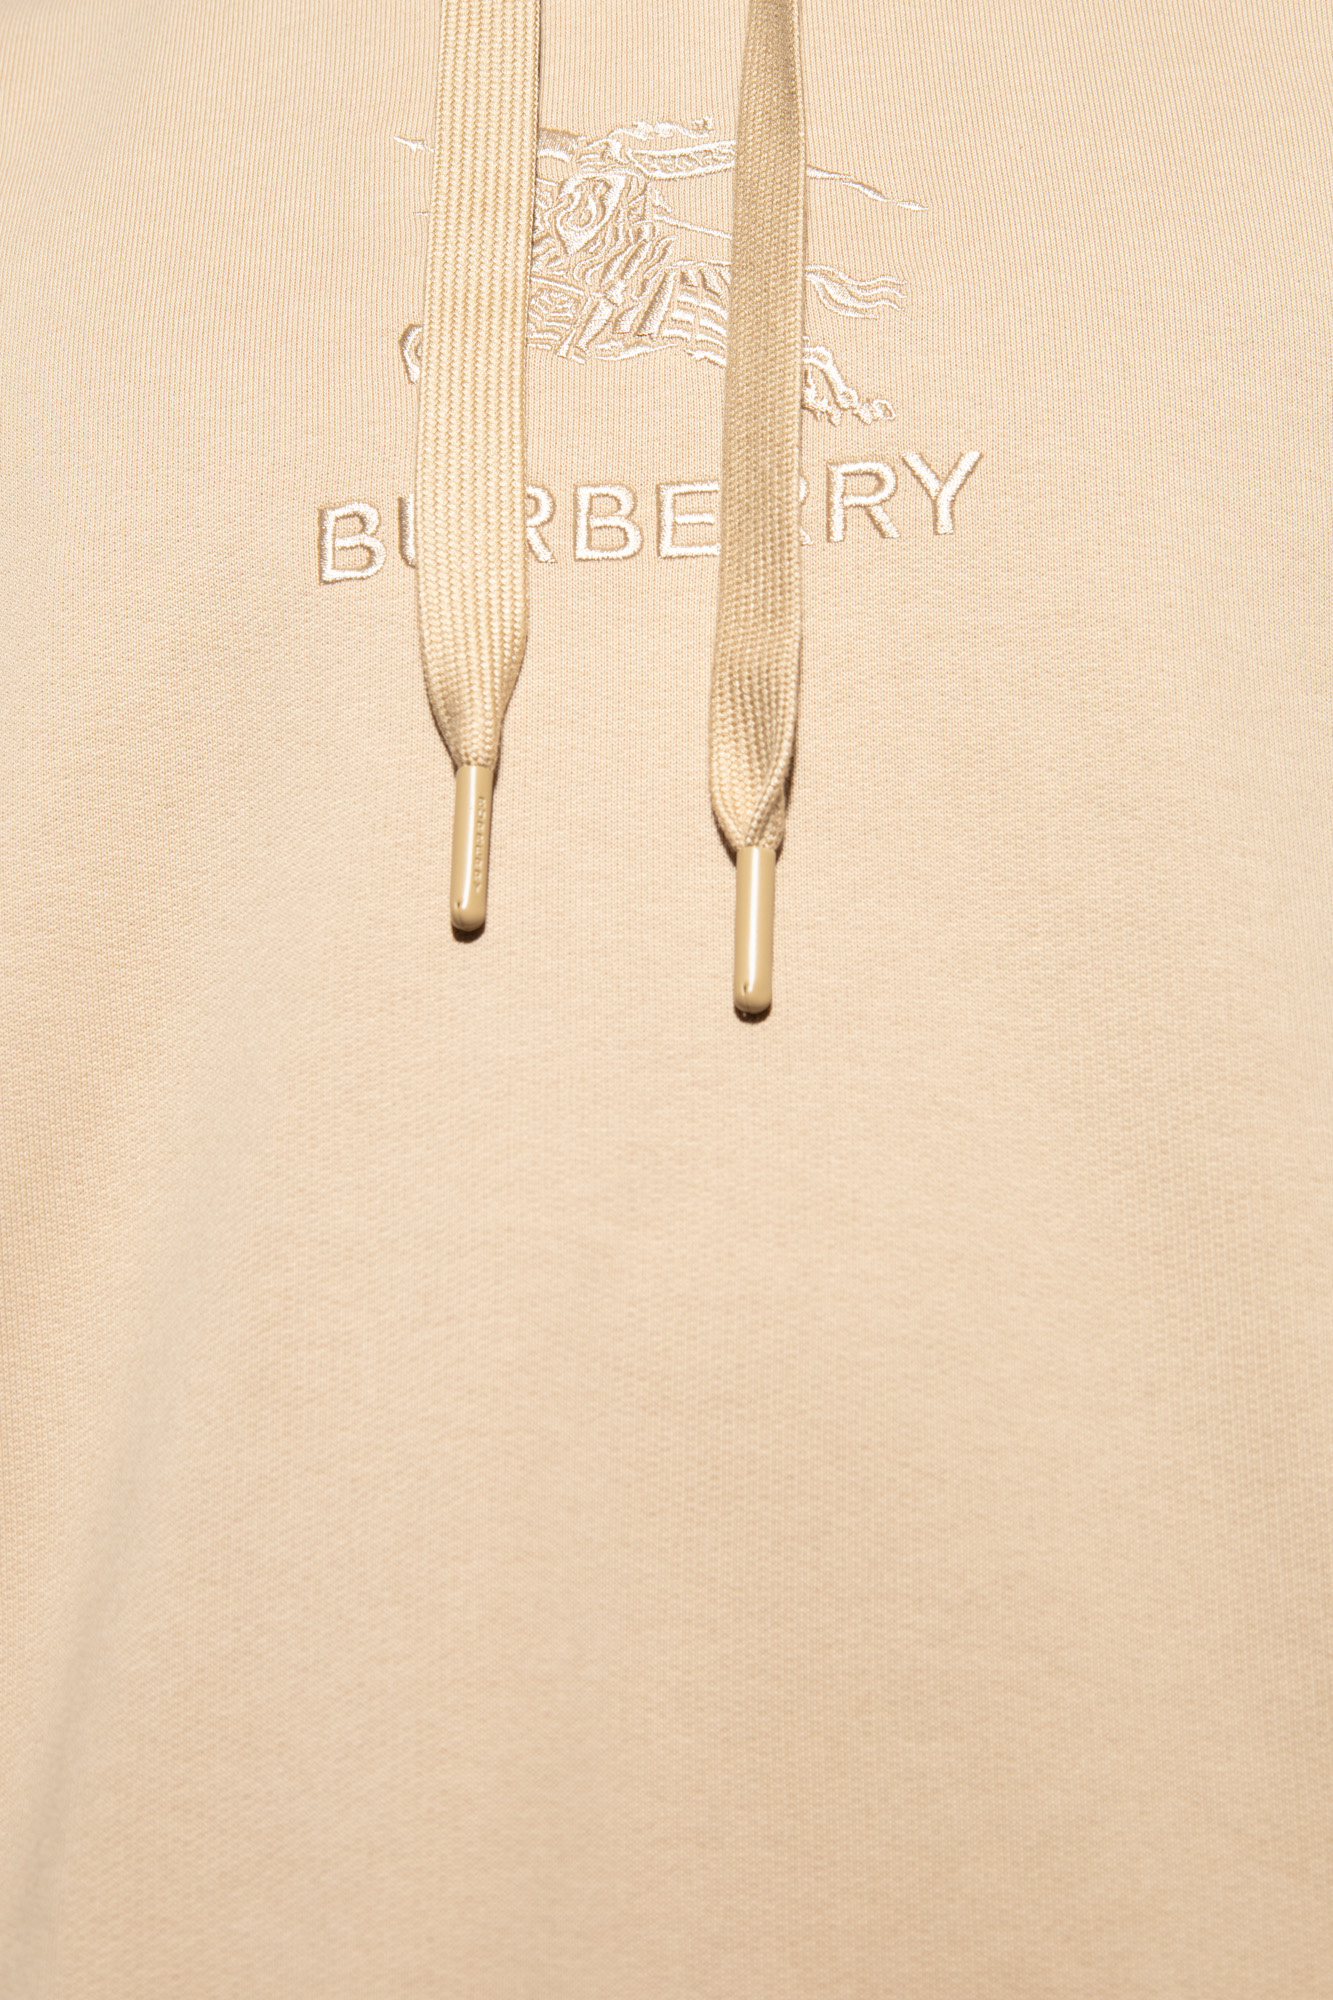 burberry WITH ‘Tidan’ hoodie with logo